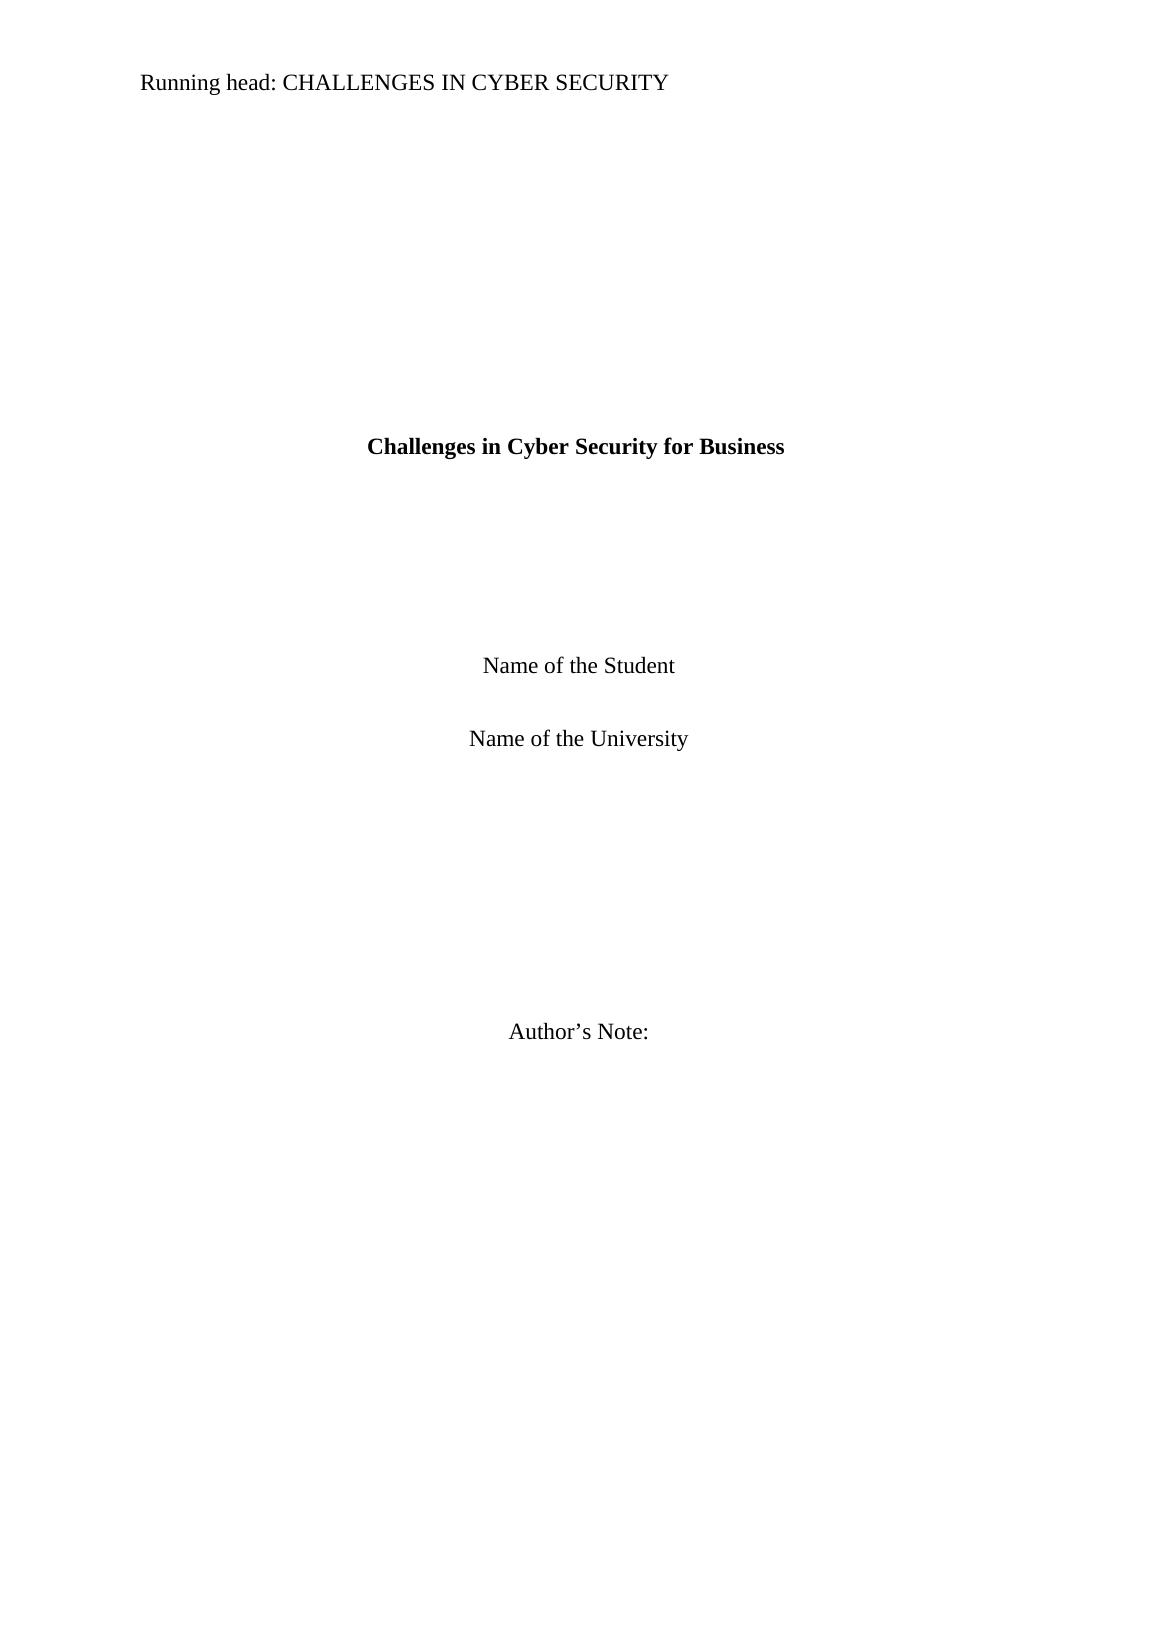 Challenges in Cyber Secuirty (pdf)_1